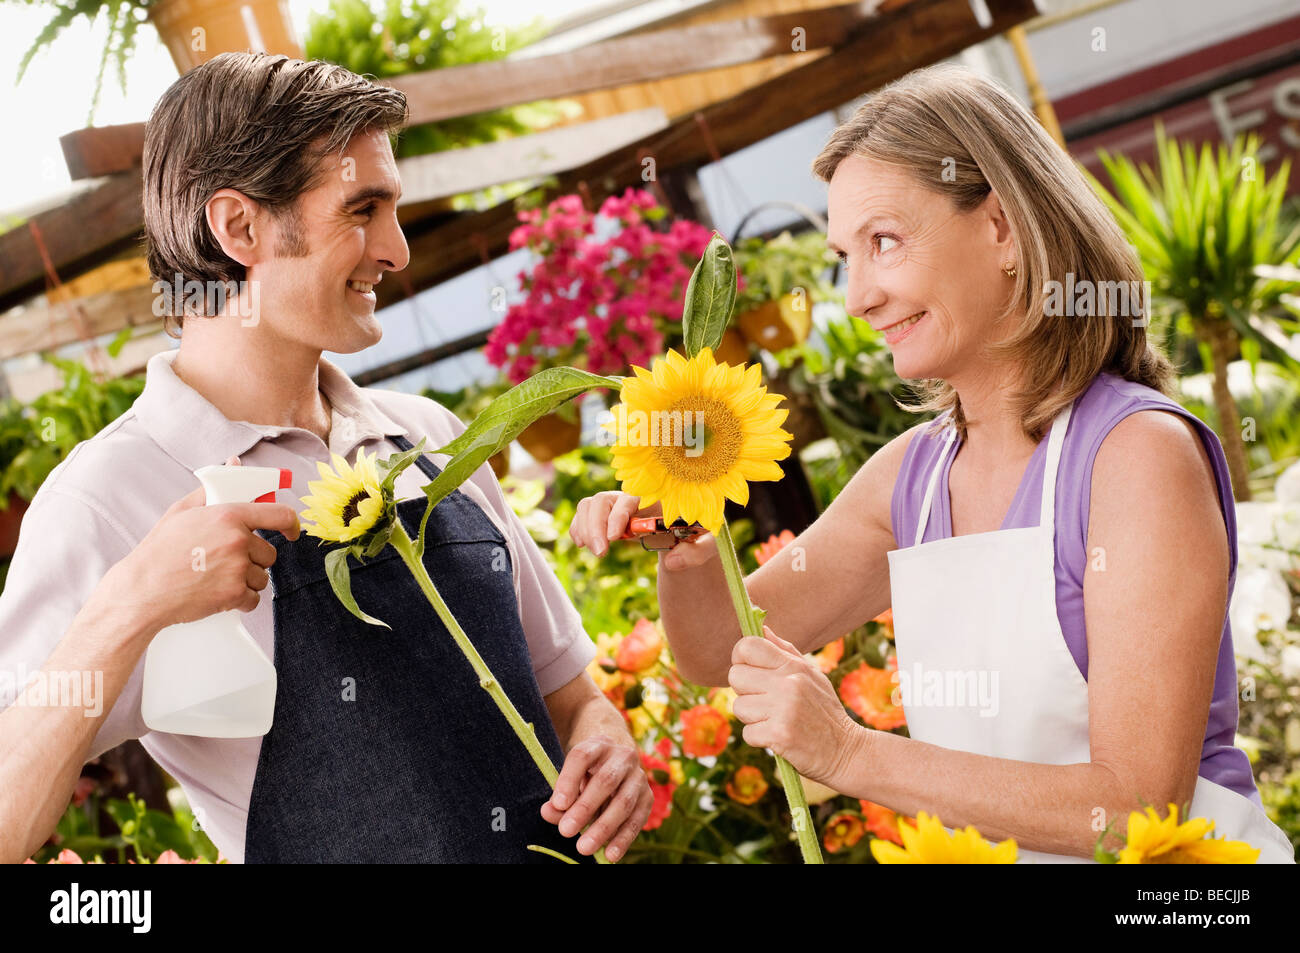 Woman and a man working in a greenhouse Stock Photo